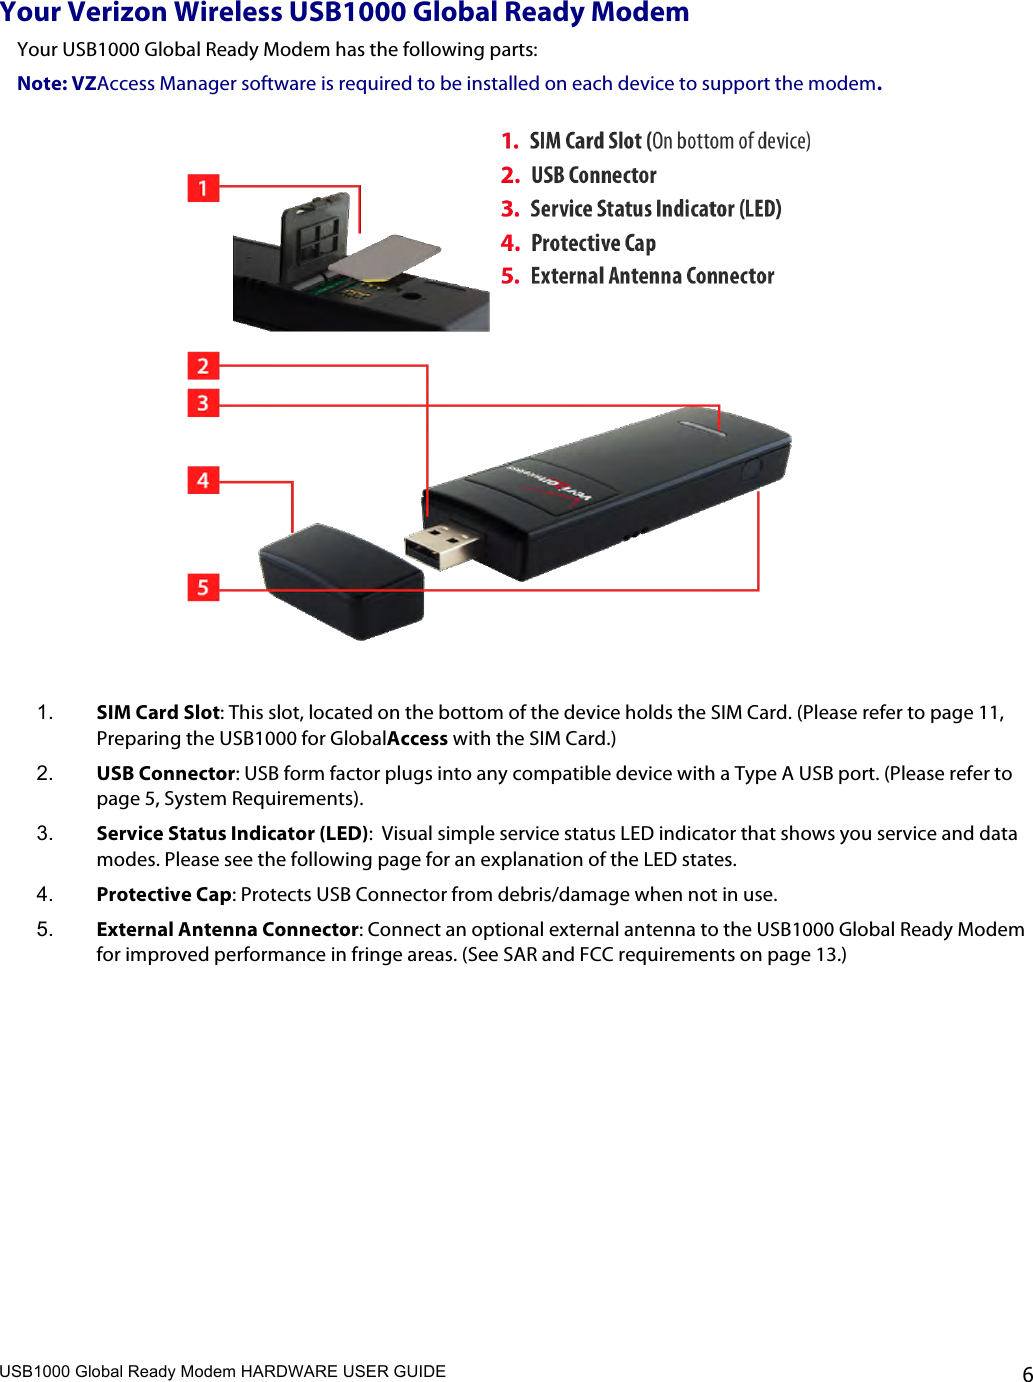 USB1000 Global Ready Modem HARDWARE USER GUIDE    6 Your Verizon Wireless USB1000 Global Ready Modem Your USB1000 Global Ready Modem has the following parts:  Note: VZAccess Manager software is required to be installed on each device to support the modem.   1.  SIM Card Slot: This slot, located on the bottom of the device holds the SIM Card. (Please refer to page 11, Preparing the USB1000 for GlobalAccess with the SIM Card.) 2.  USB Connector: USB form factor plugs into any compatible device with a Type A USB port. (Please refer to page 5, System Requirements). 3.  Service Status Indicator (LED):  Visual simple service status LED indicator that shows you service and data modes. Please see the following page for an explanation of the LED states. 4.  Protective Cap: Protects USB Connector from debris/damage when not in use.  5.  External Antenna Connector: Connect an optional external antenna to the USB1000 Global Ready Modem for improved performance in fringe areas. (See SAR and FCC requirements on page 13.)            